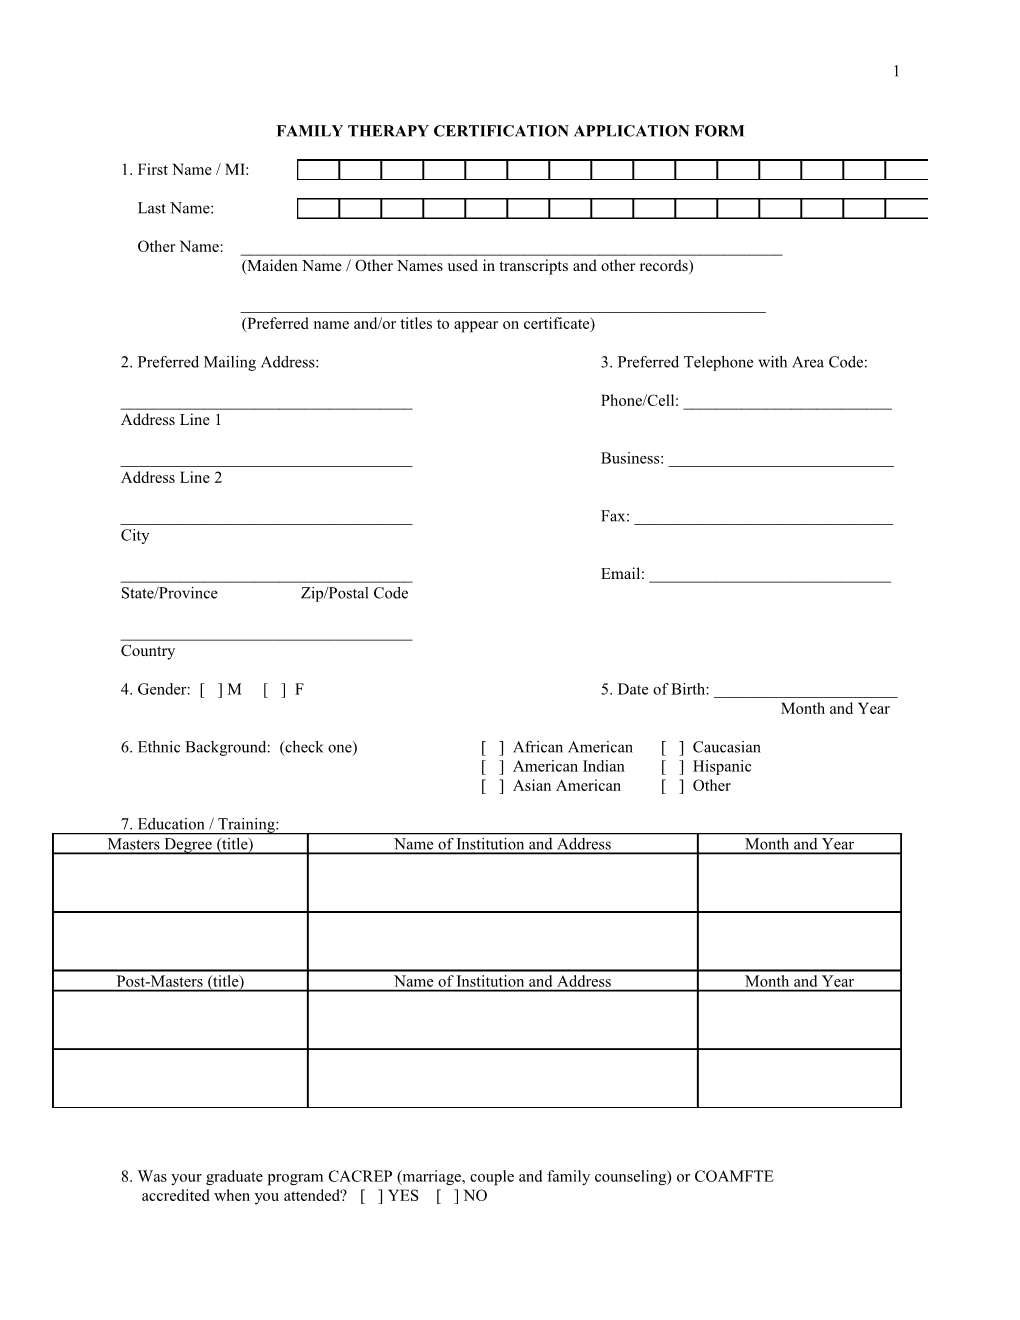 Family Therapy Certification Application Form